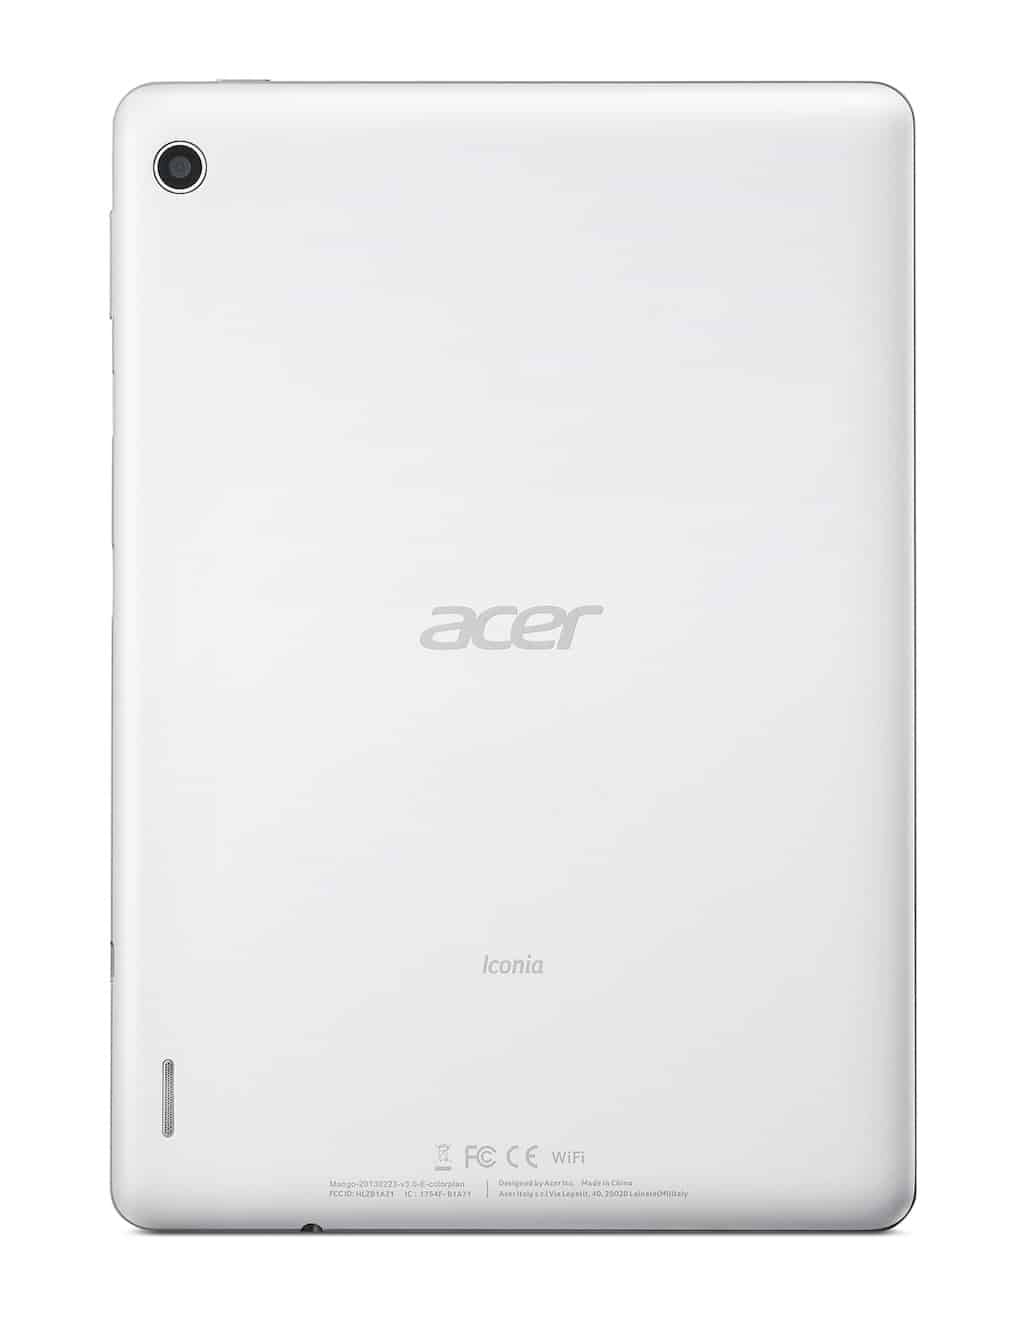 Acer Iconia A1 Tablet - 6